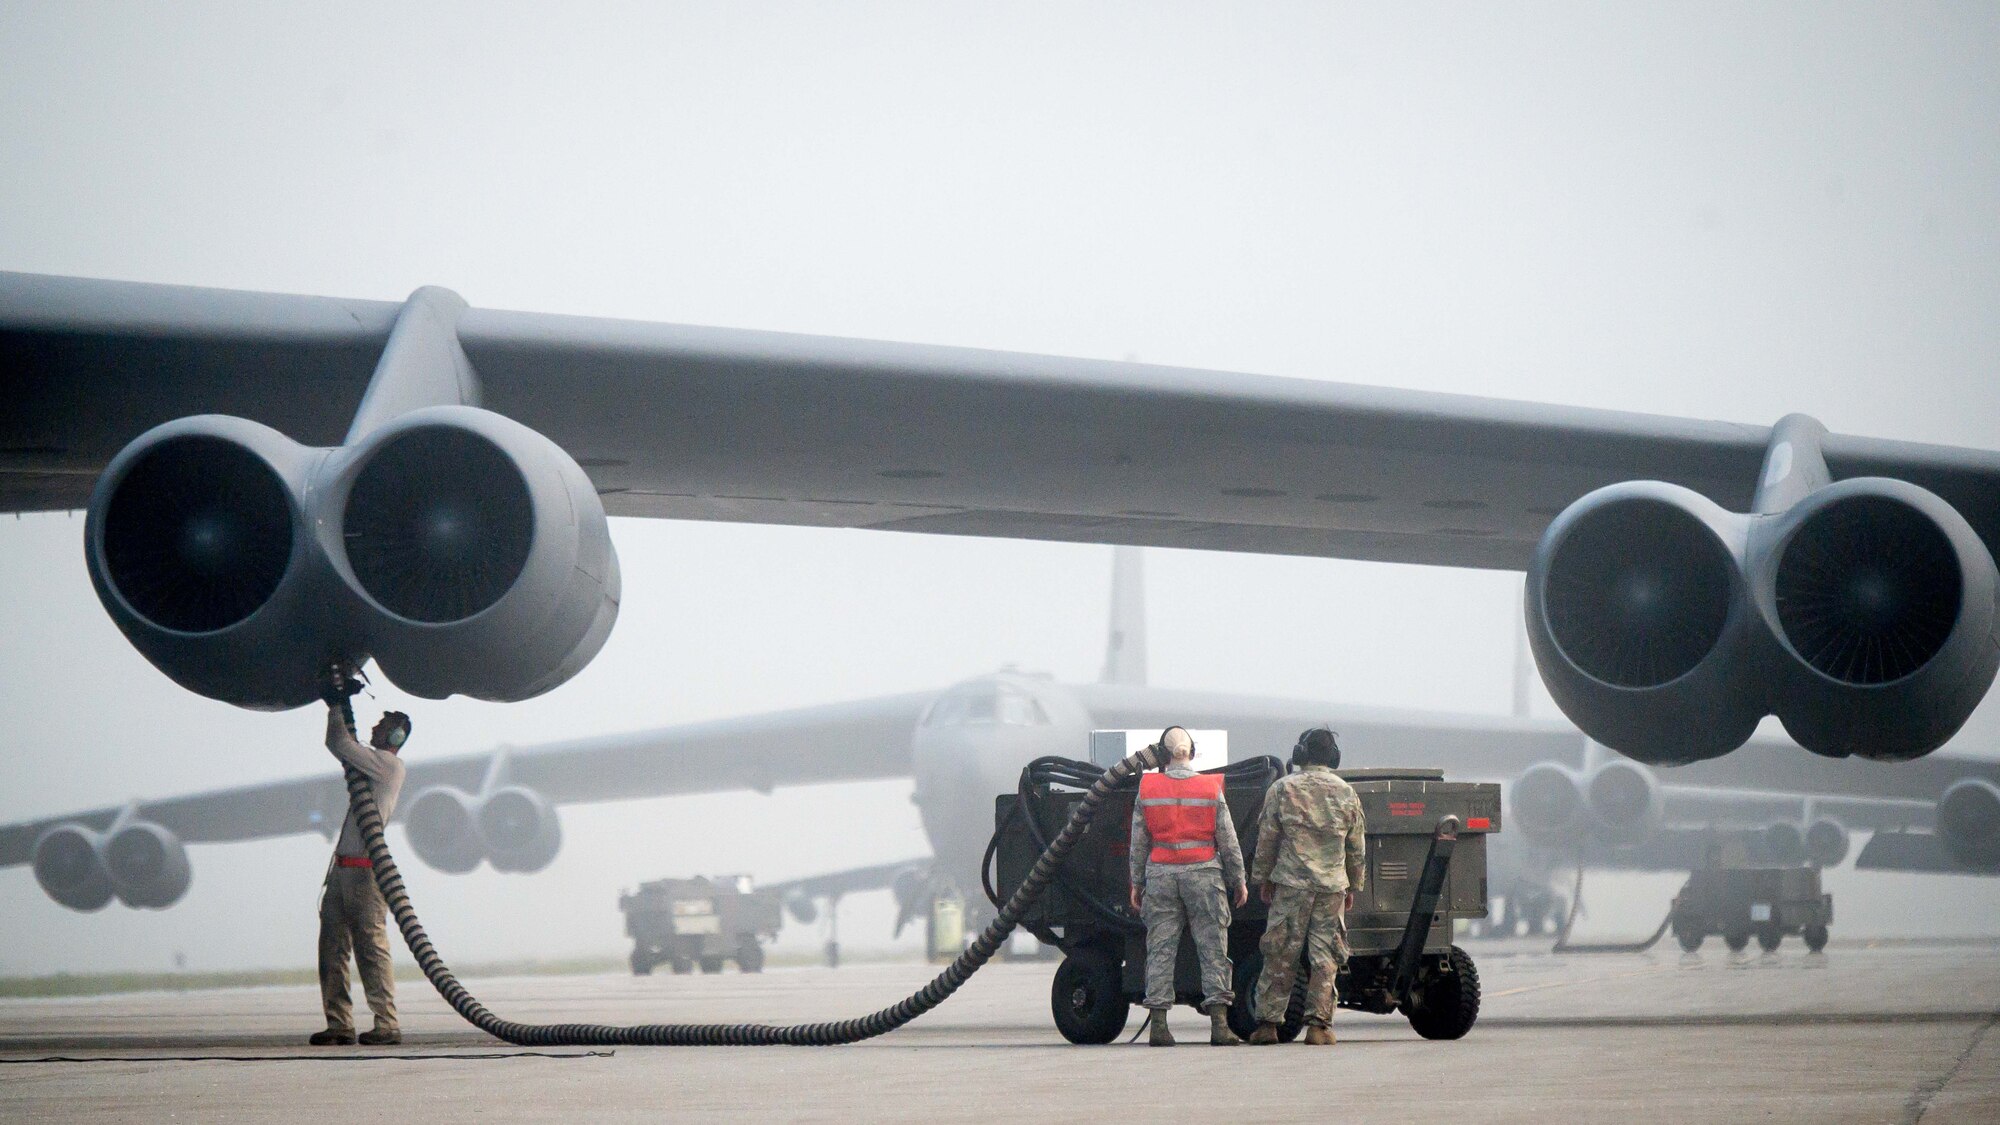 Airmen from the 96th Aircraft Maintenance Squadron, prepare a B-52H Stratofortress prior to take off at Eielson Air Force Base, Alaska, during a Bomber Task Force mission, June 16, 2020.